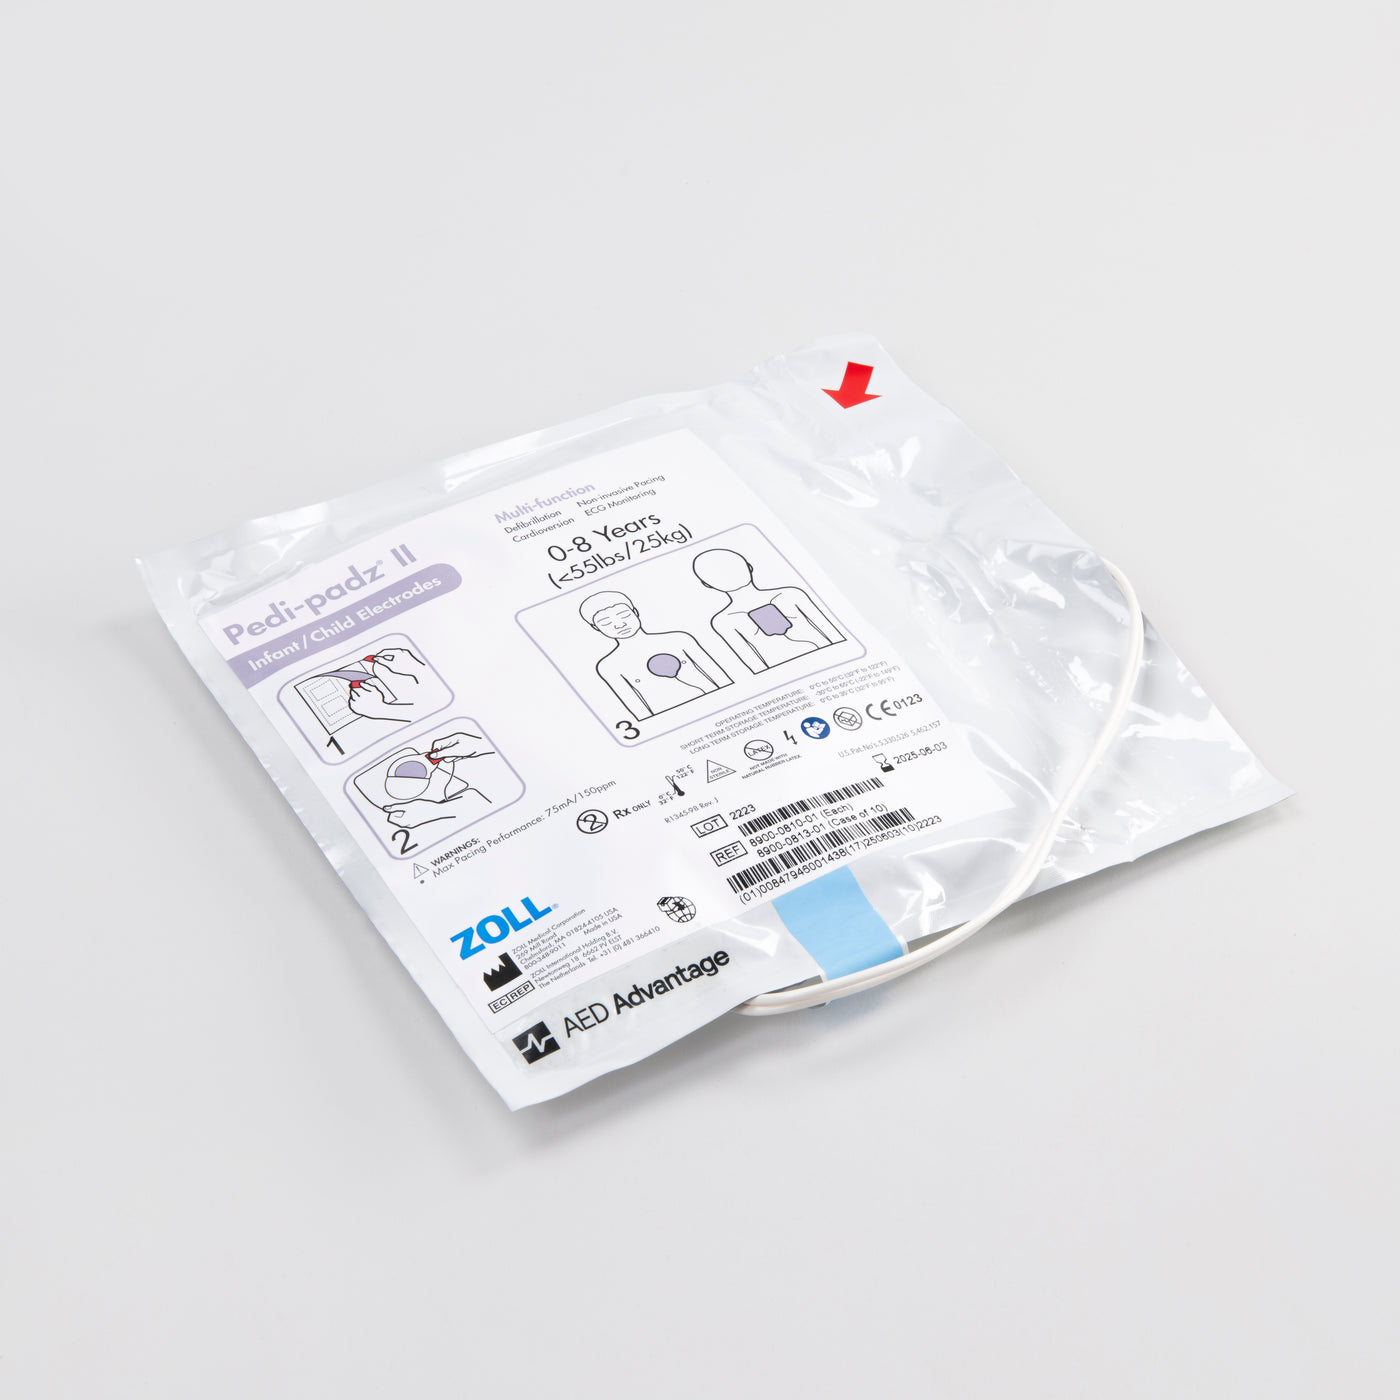 ZOLL AED Plus pediatric electrodes encased in a white foil package with a white connector cord